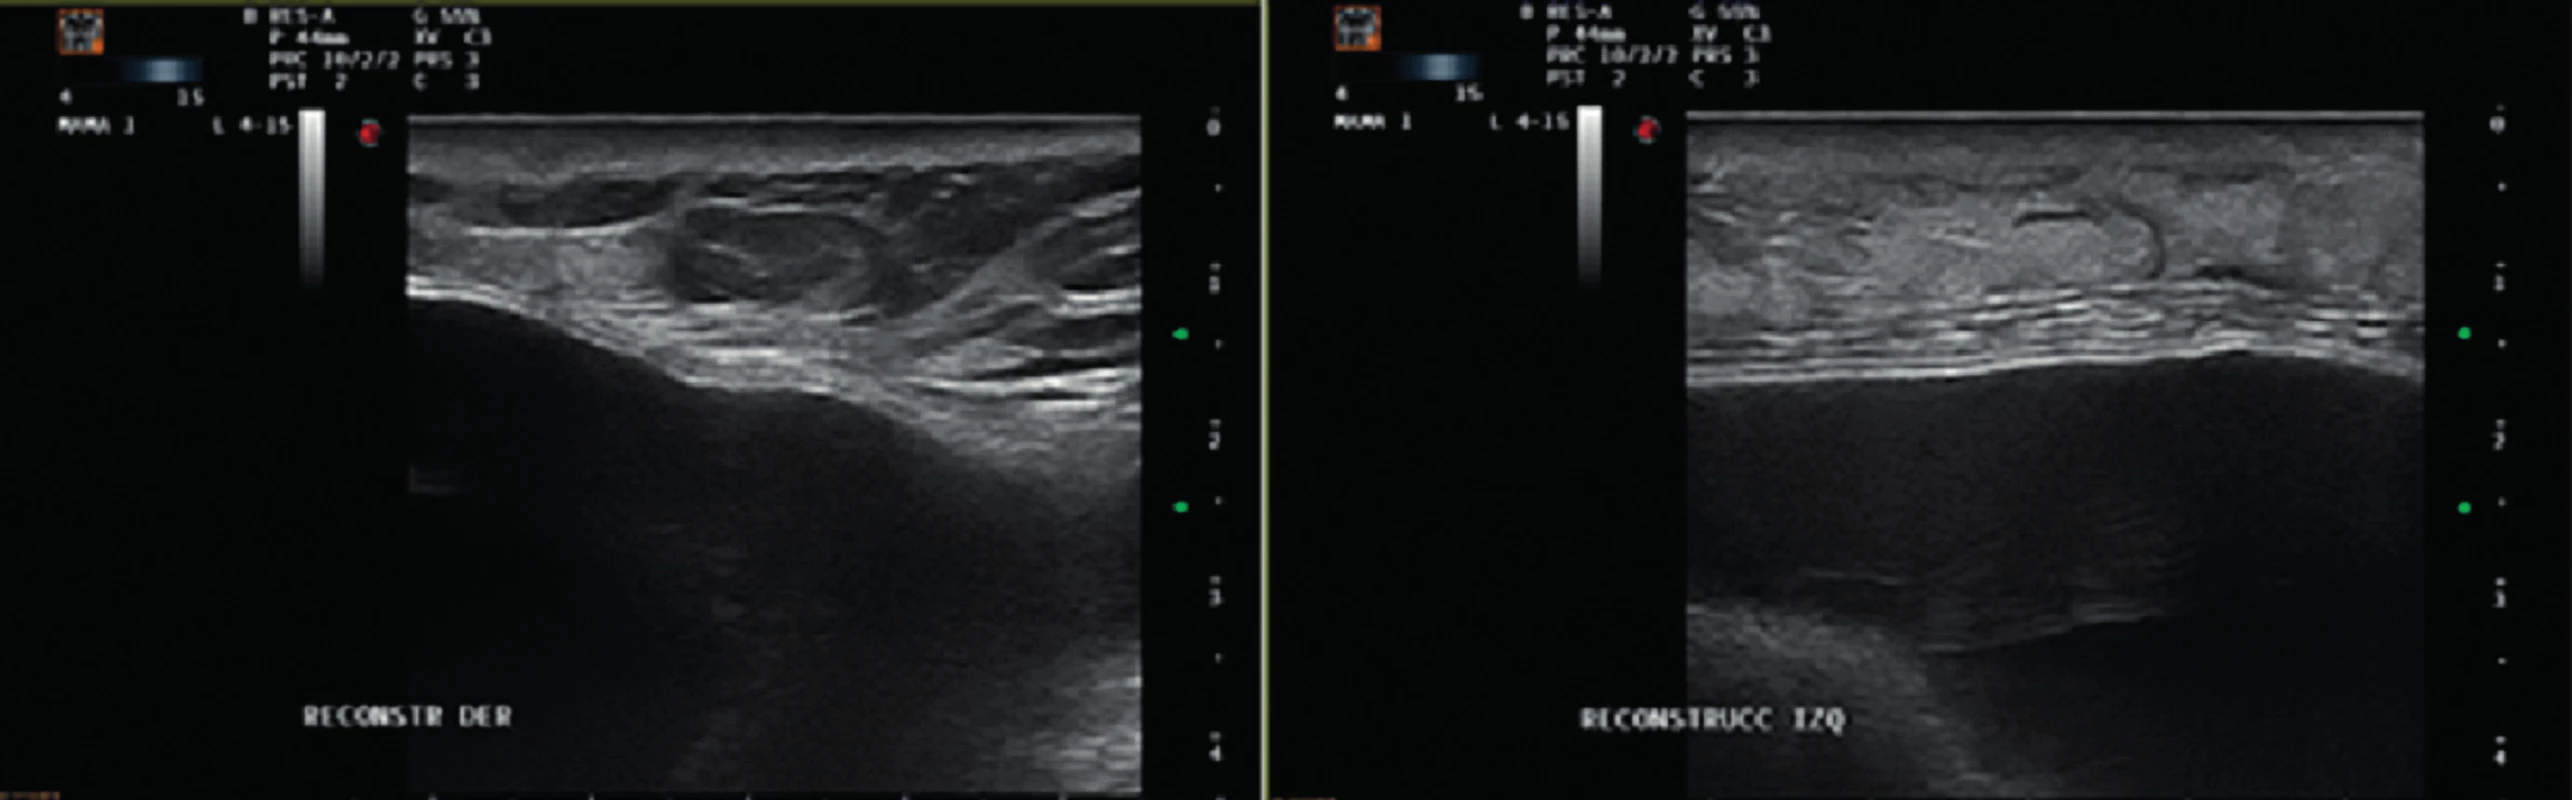 Ultrasound images showing no evidence of seroma or abscess on the right and left sides
Figure